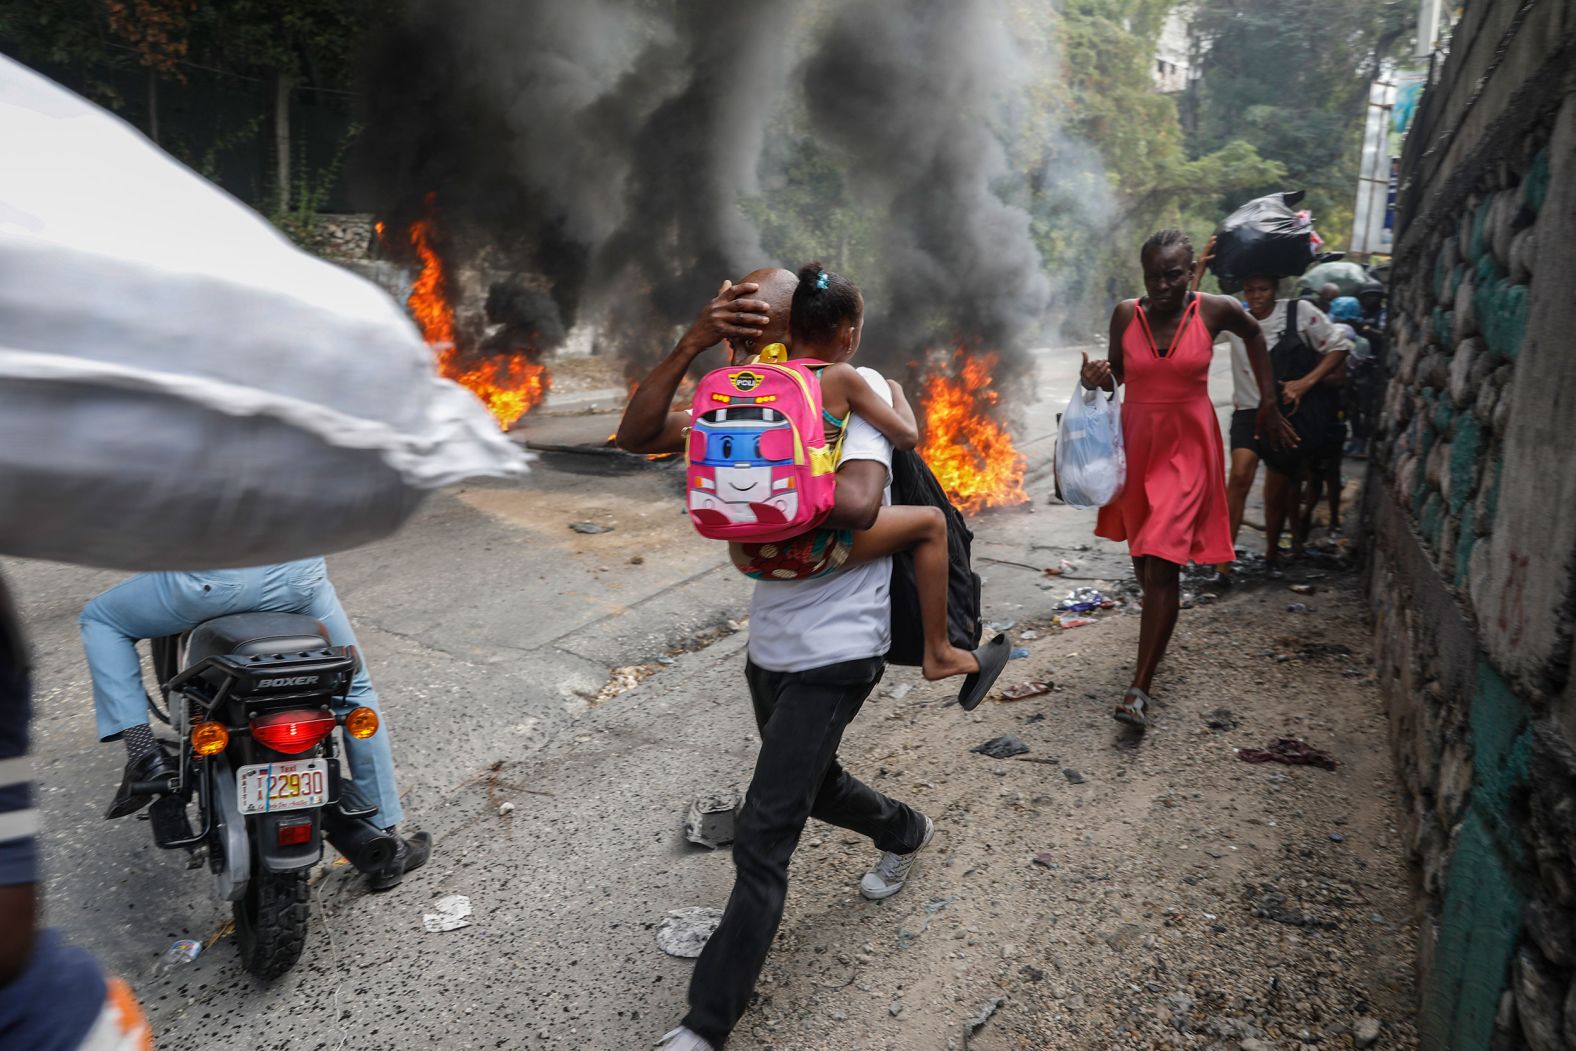 People walk past burning tires during a protest against Haitian Prime Minister Ariel Henry in Port-au-Prince, Haiti, on Monday, February 5. The country has seen <a href="index.php?page=&url=https%3A%2F%2Fwww.cnn.com%2F2023%2F08%2F01%2Famericas%2Fhaiti-violence-explained-intl%2Findex.html">deepening unrest</a> since the 2021 assassination of President Jovenel Moïse.